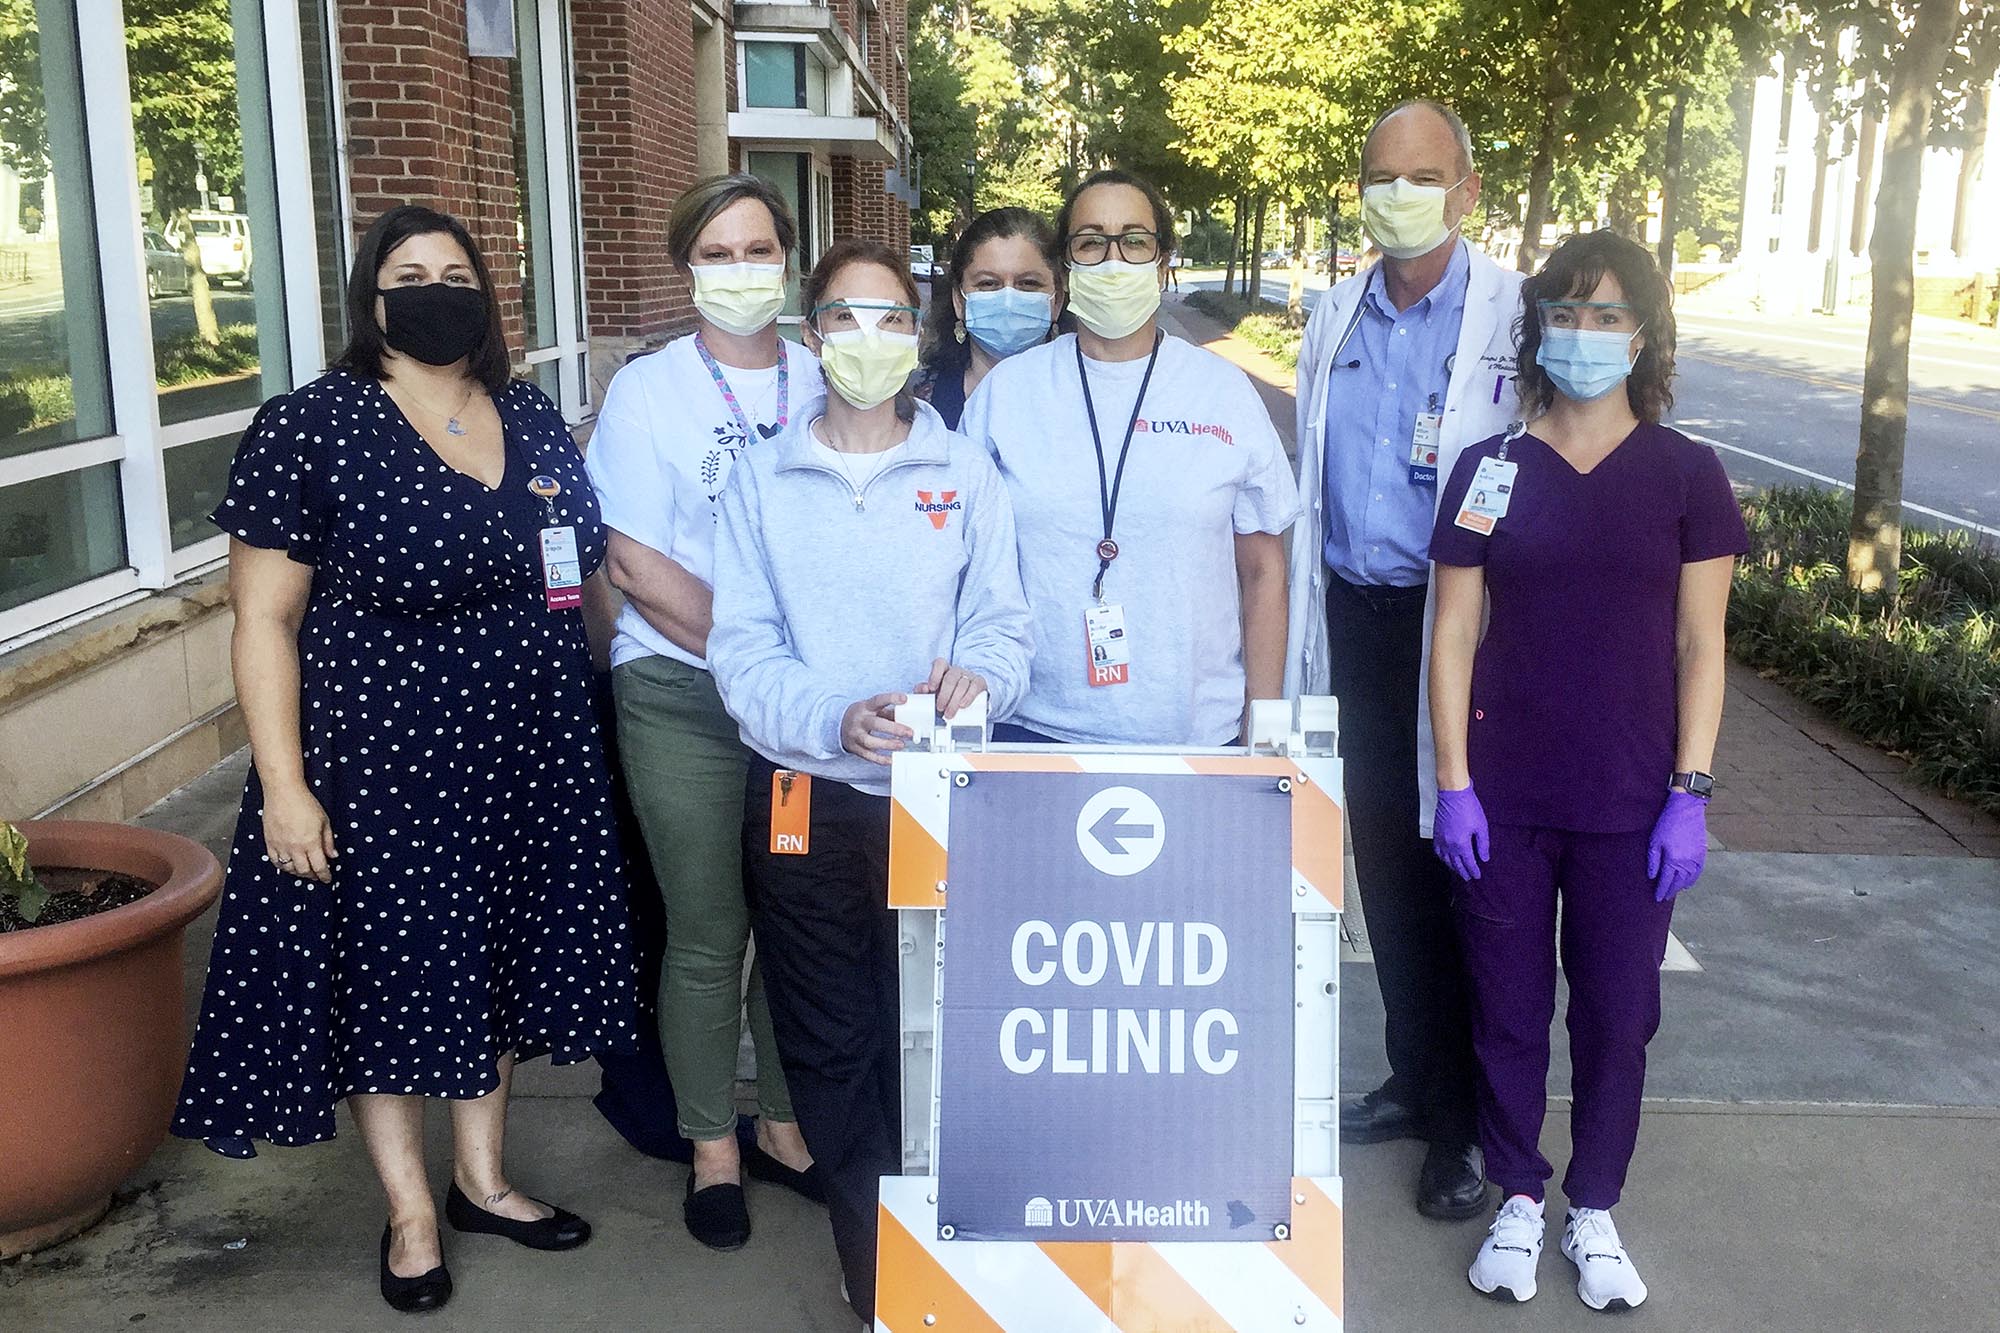 Bridgette Arlook, Christy Breeden, Rebecca Wade, Crystal Reed, Jennifer Pinnata, William Petri Jr. and Andrea Stanley pose together for a photo at a Covid clinic